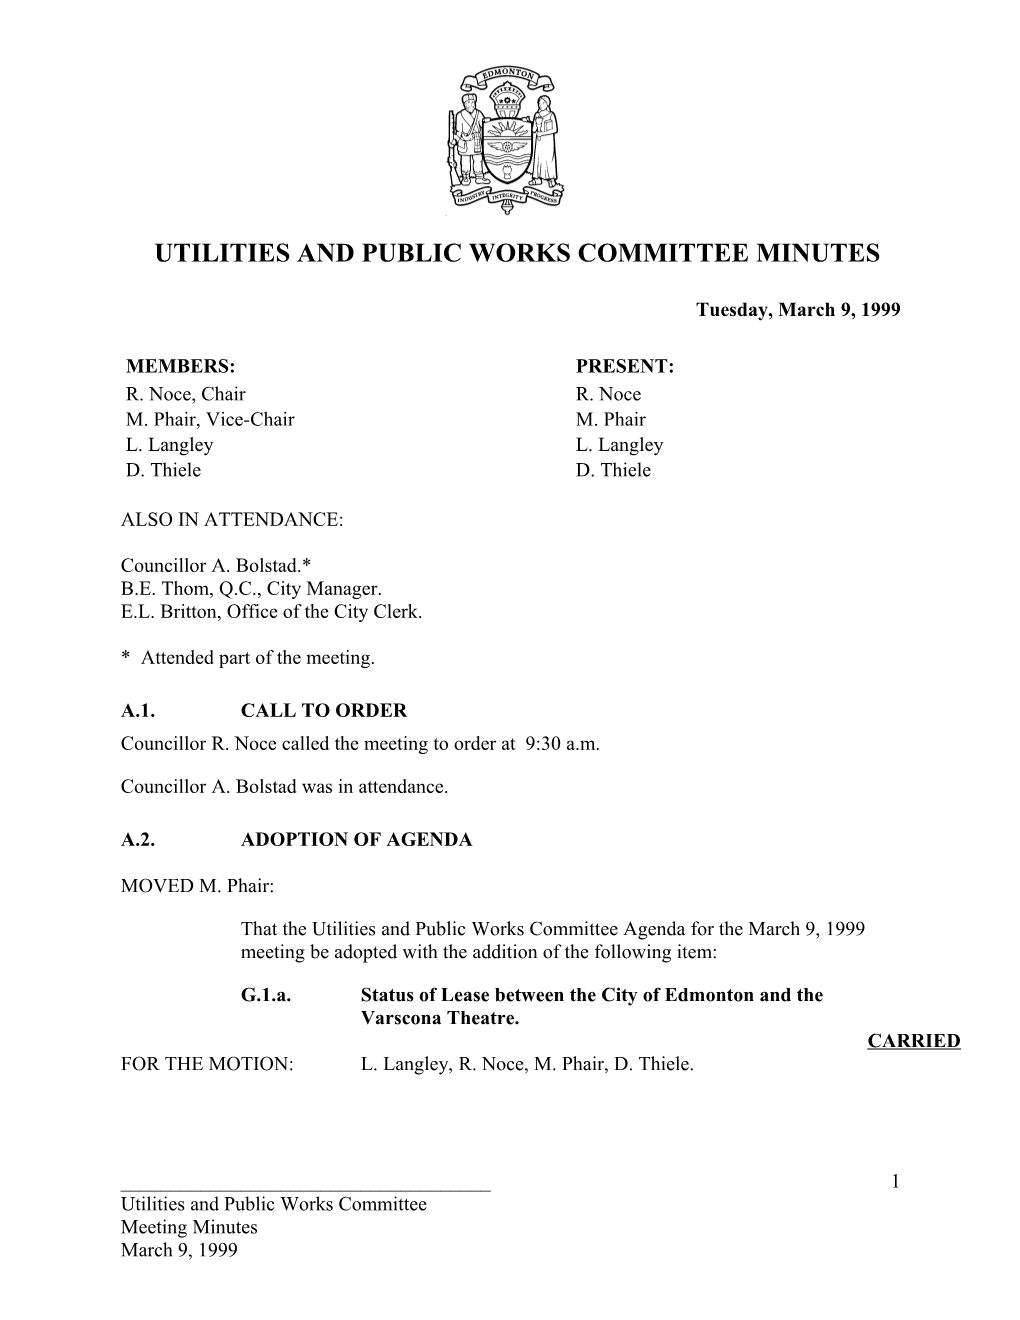 Minutes for Utilities and Public Works Committee March 9, 1999 Meeting